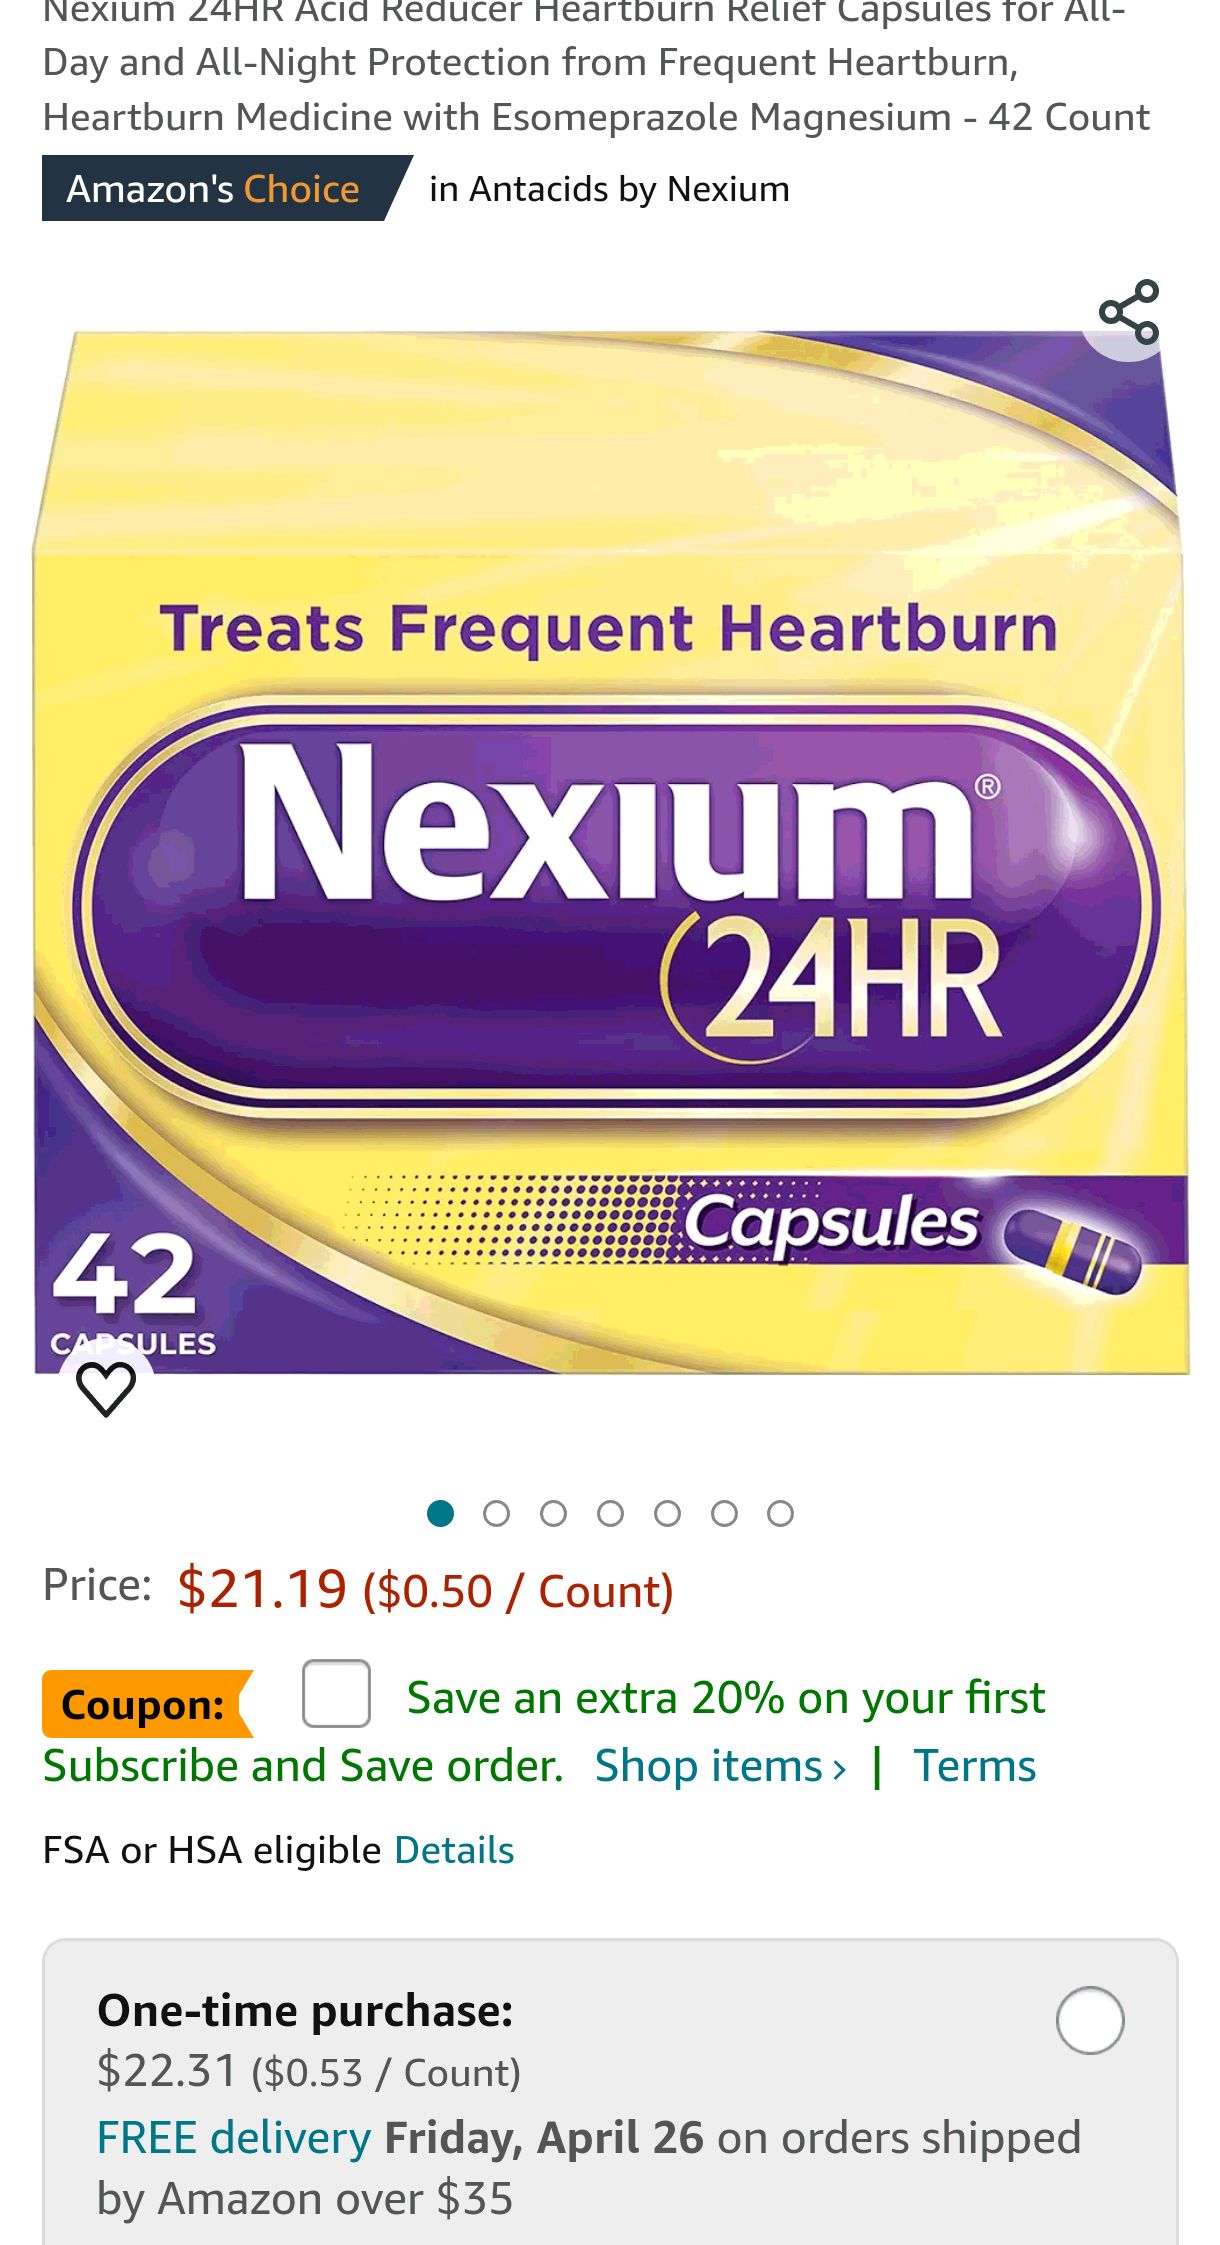 Nexium 24HR Acid Reducer Heartburn Relief Capsules for All-Day and All-Night Protection from Frequent Heartburn, Heartburn Medicine with Esomeprazole Magnesium - 42 Count : Health & Household